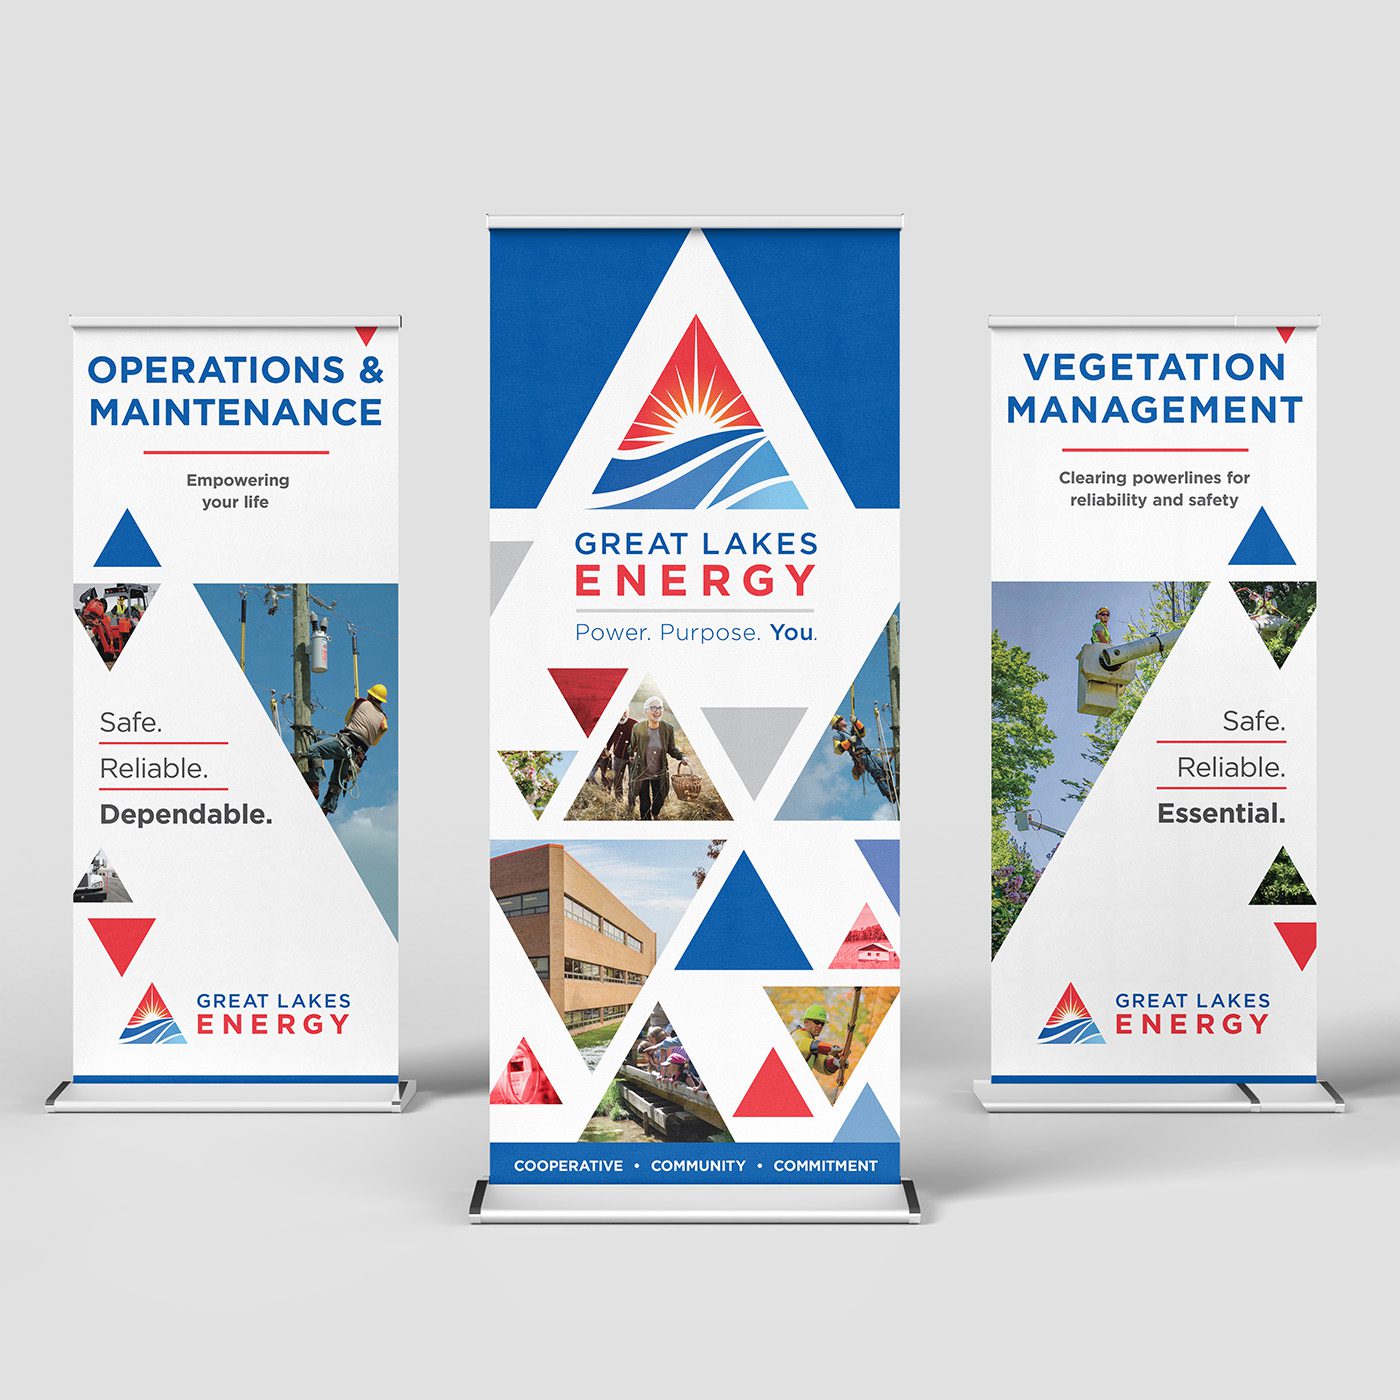 Design for Great Lakes Energy’s Marketing Support Materials